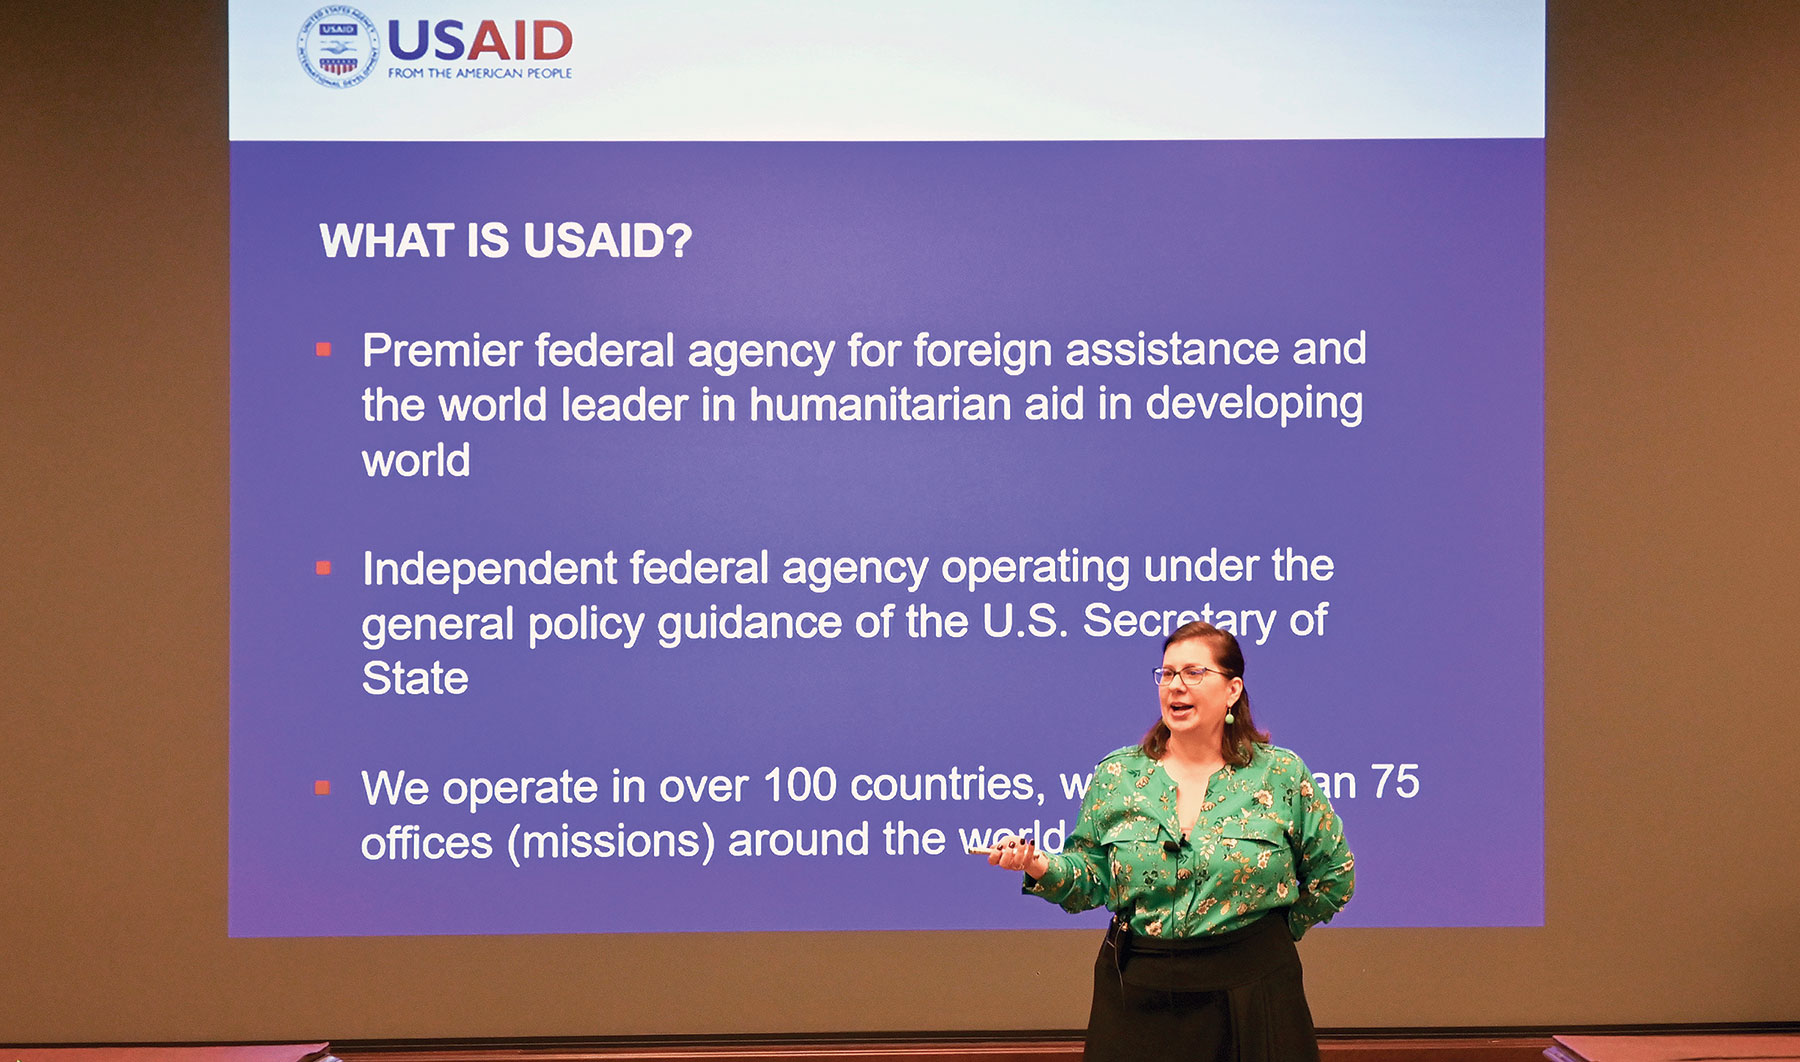 Stephanie Chetraru, the U.S. Army Command and General Staff College Distinguished Chair for Development Studies, discusses USAID's role in countering Russian and Chinese influence during the InterAgency Brown-Bag Lecture on March 12, 2020.